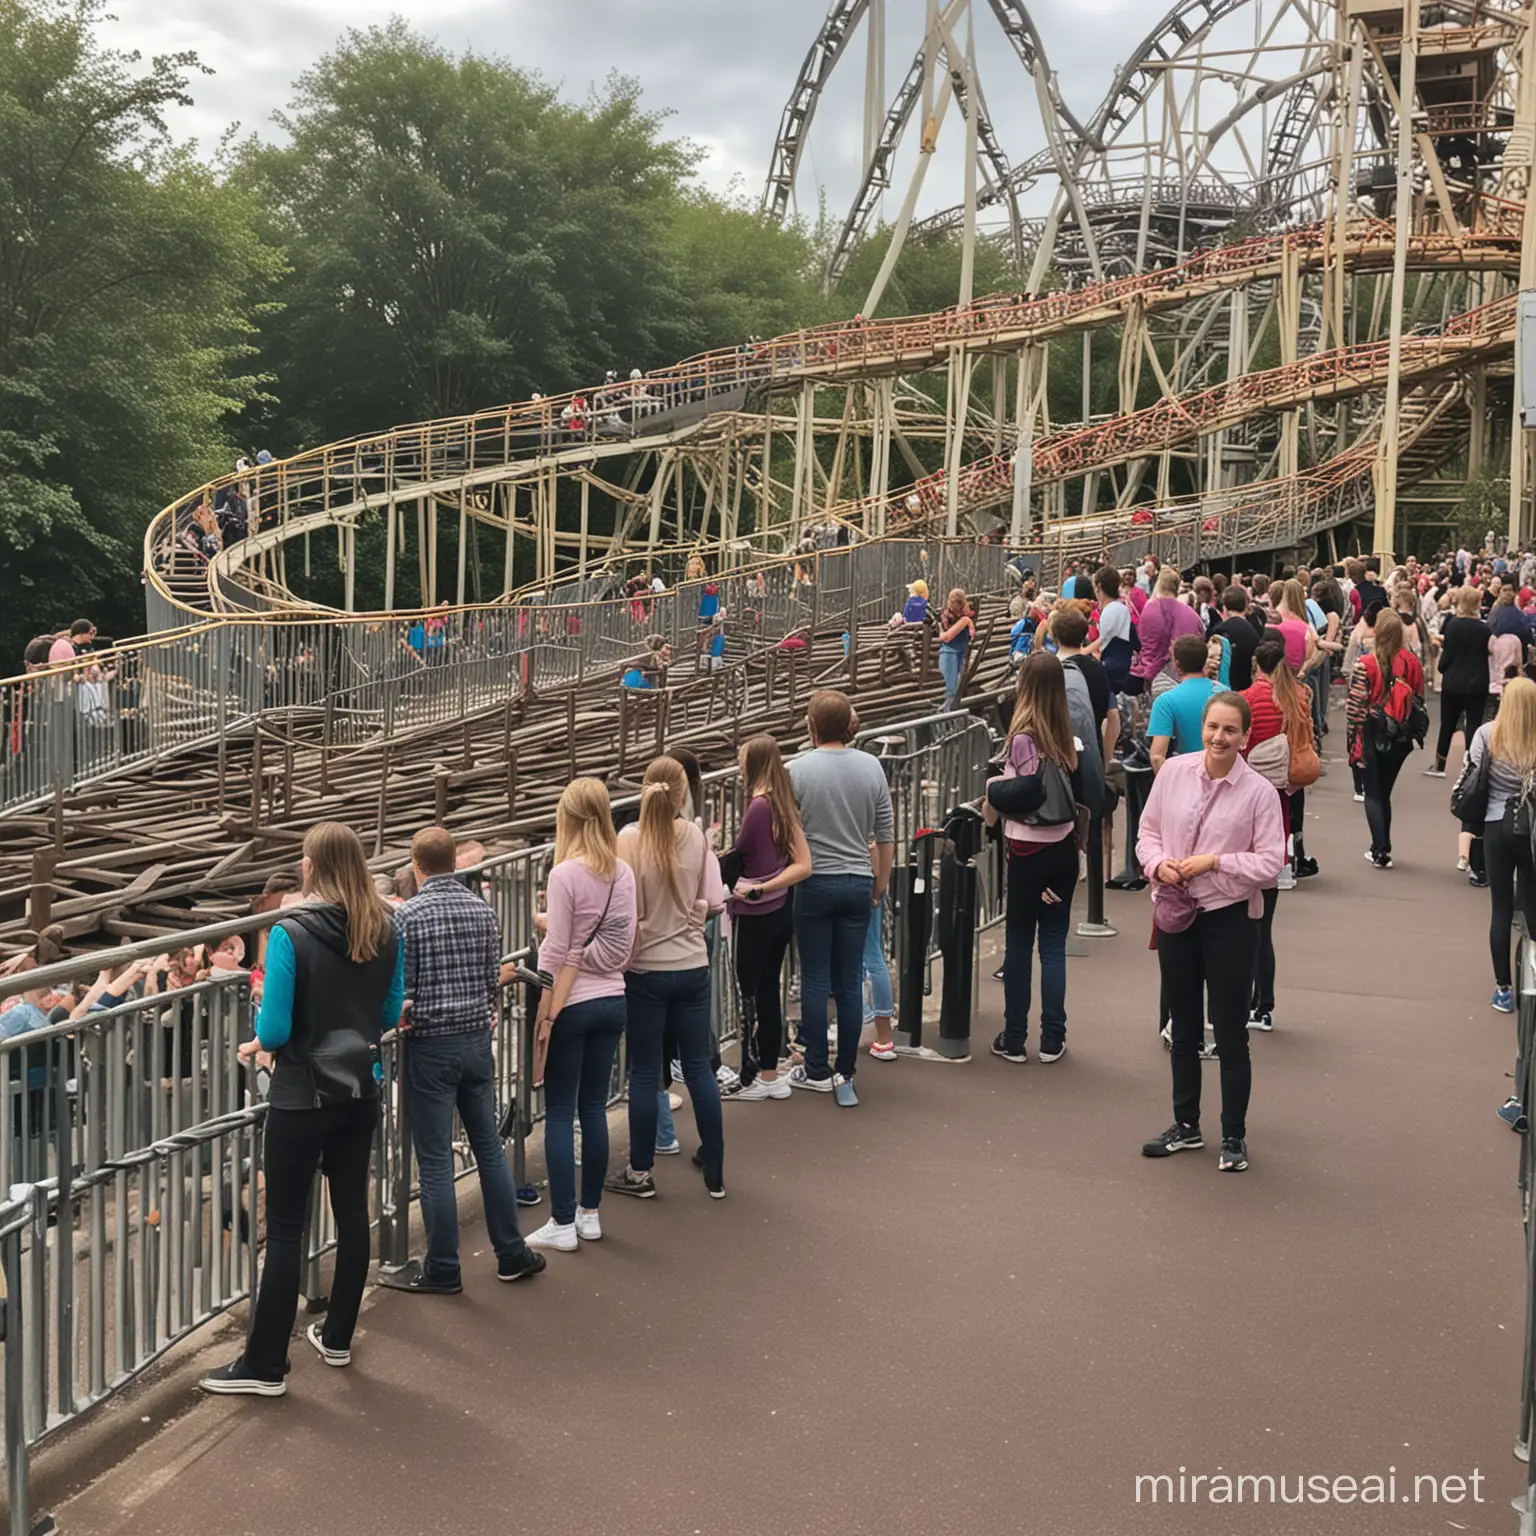 Thrilling Queue Line for Exciting Rollercoaster Adventure